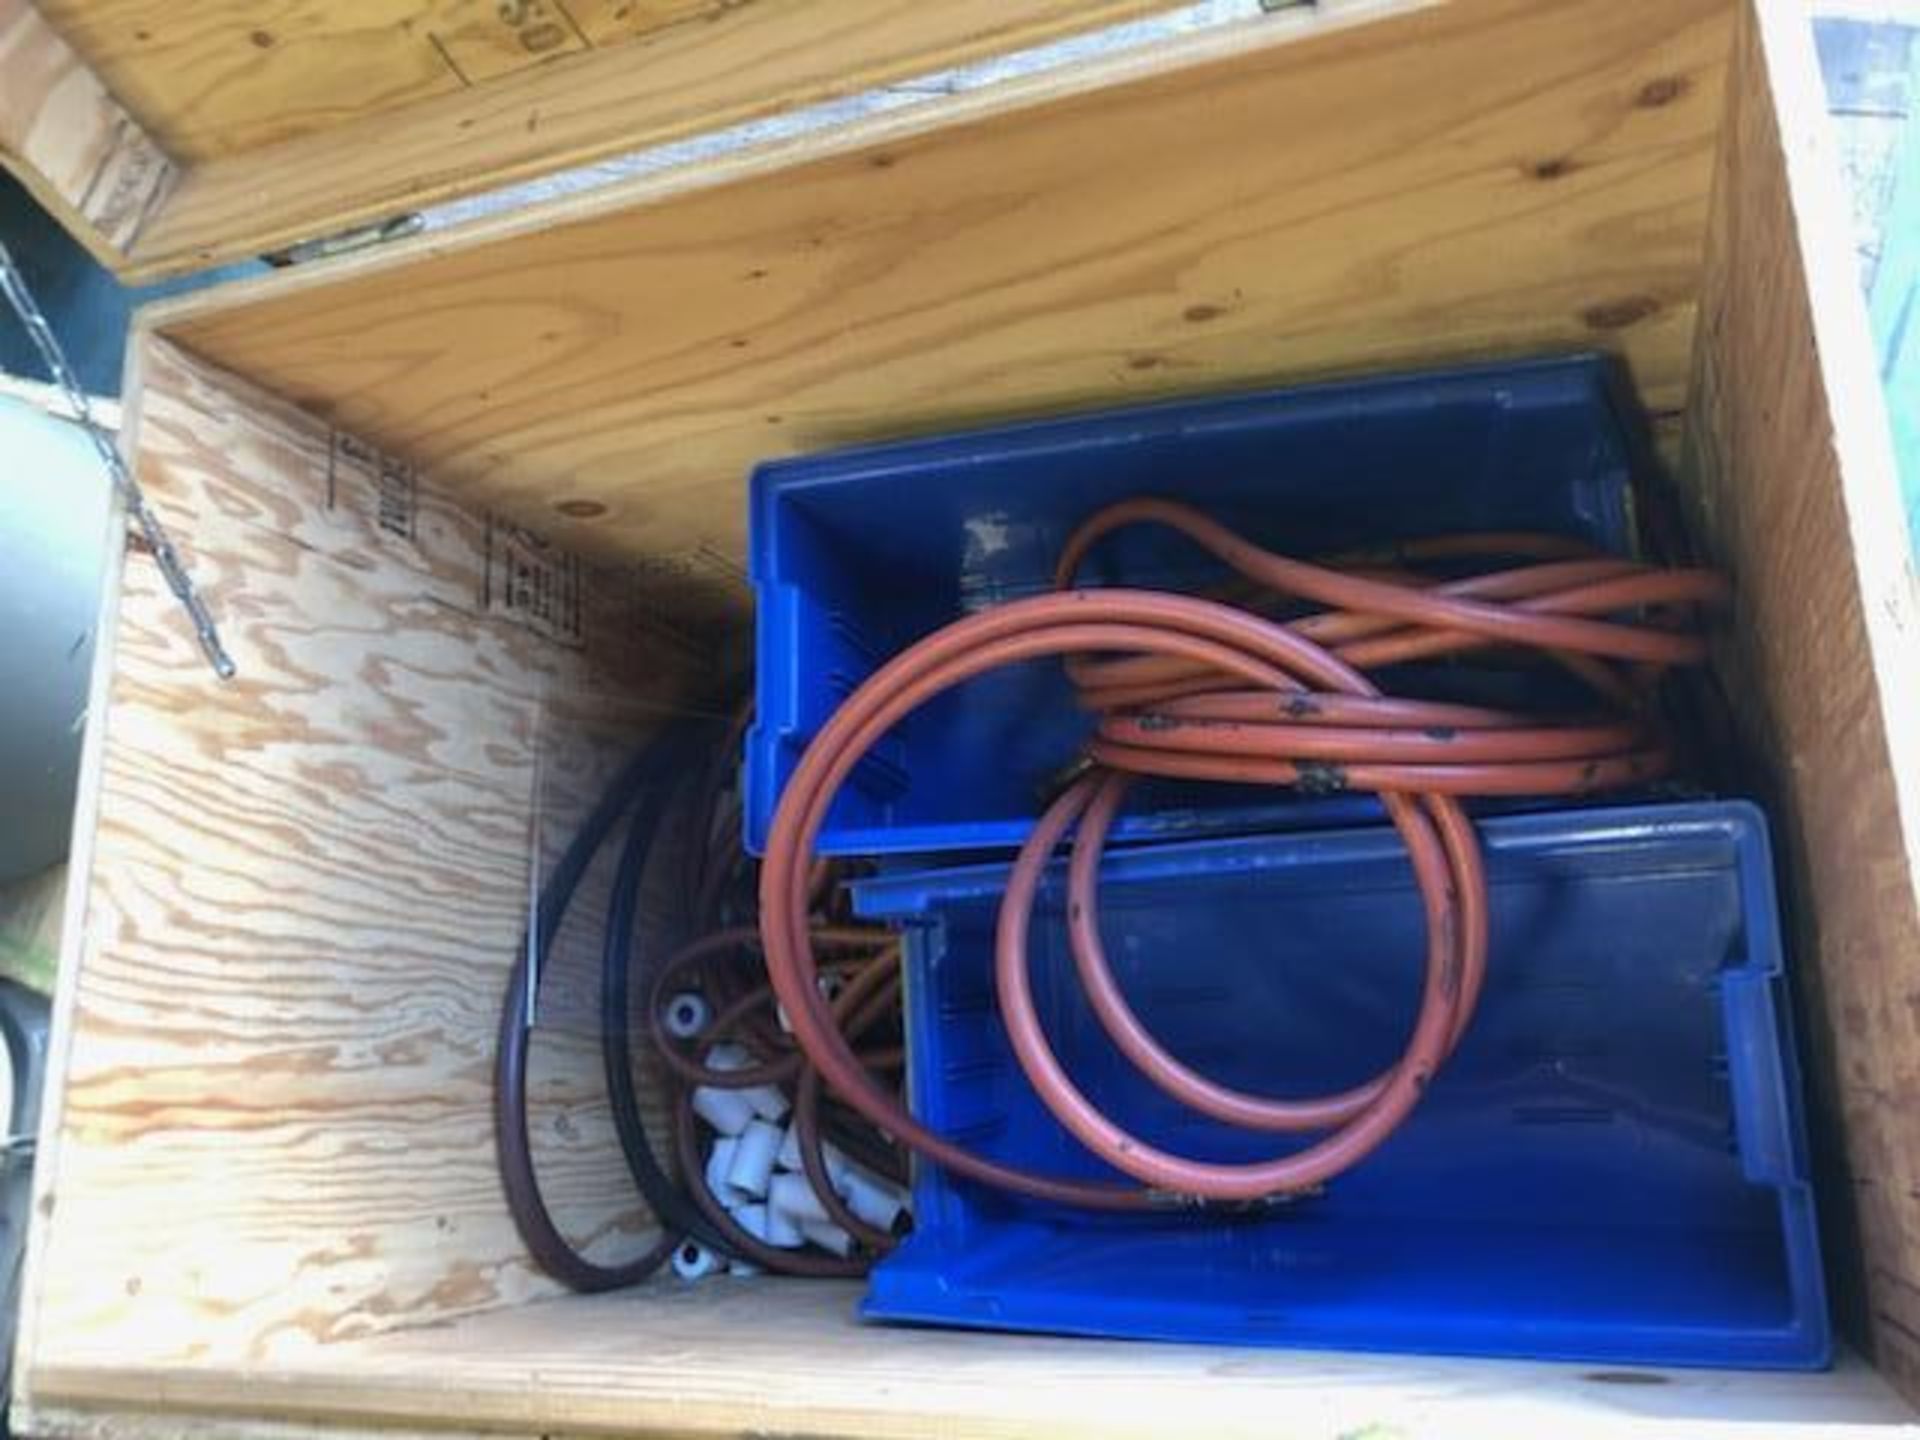 LOT - WOOD BOX, W/ CONTENTS OF ASSORTED HOSES (LOCATION 15 MAIN) - Image 3 of 3